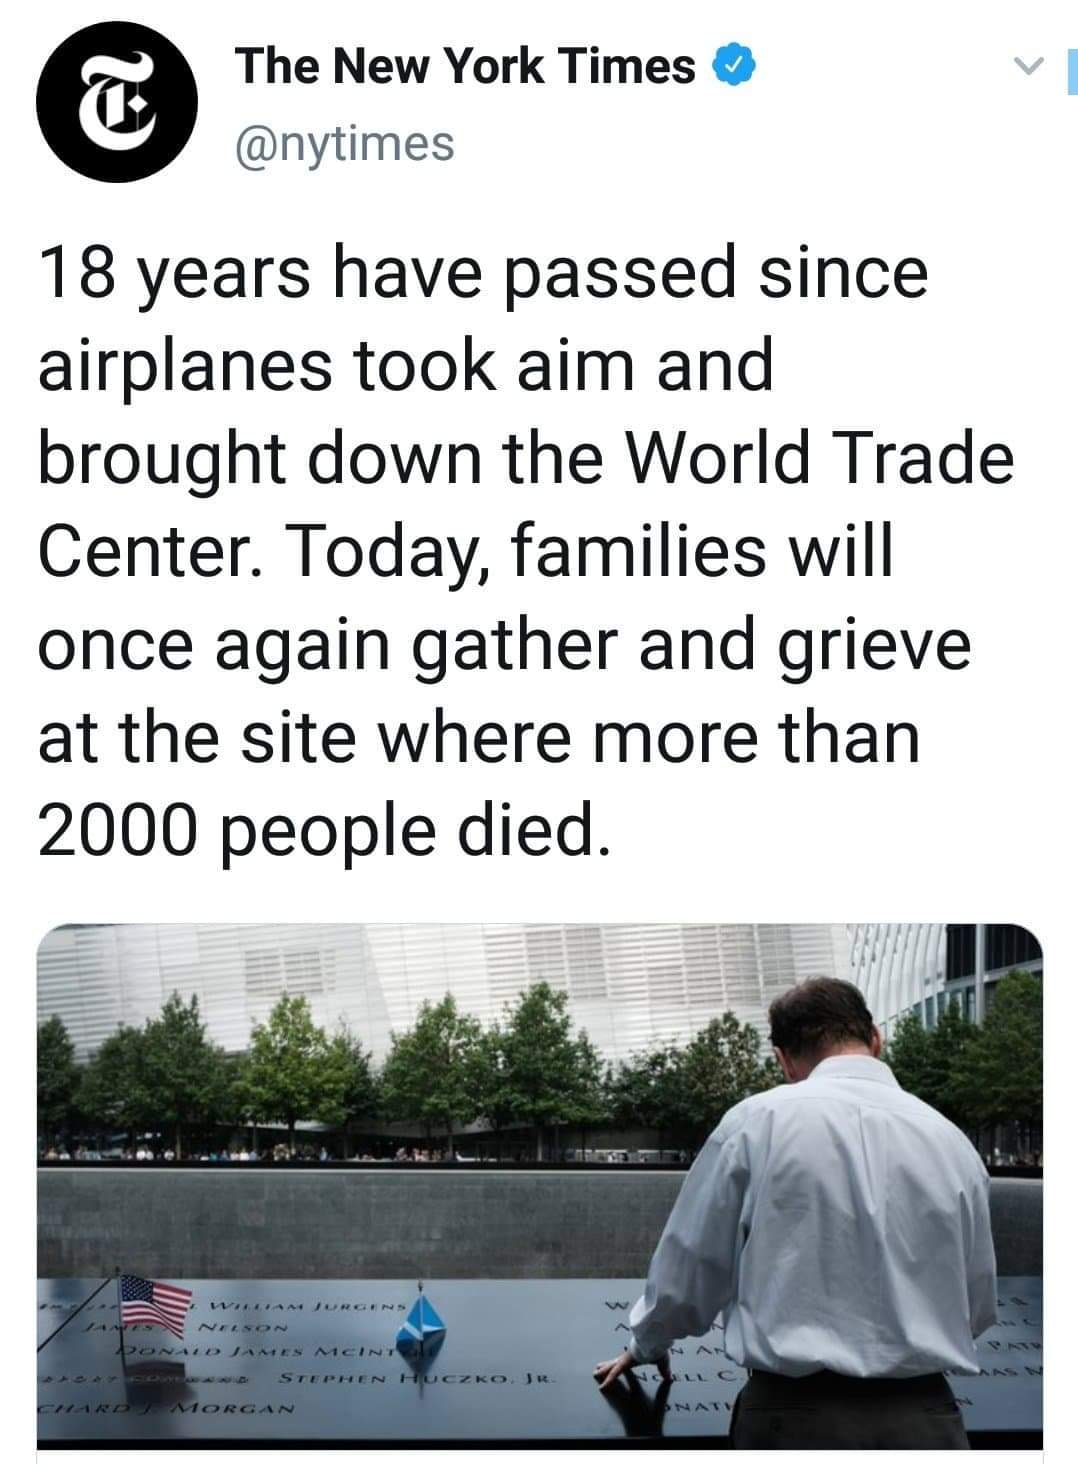 Never forget what airplanes did... #ban winged craft